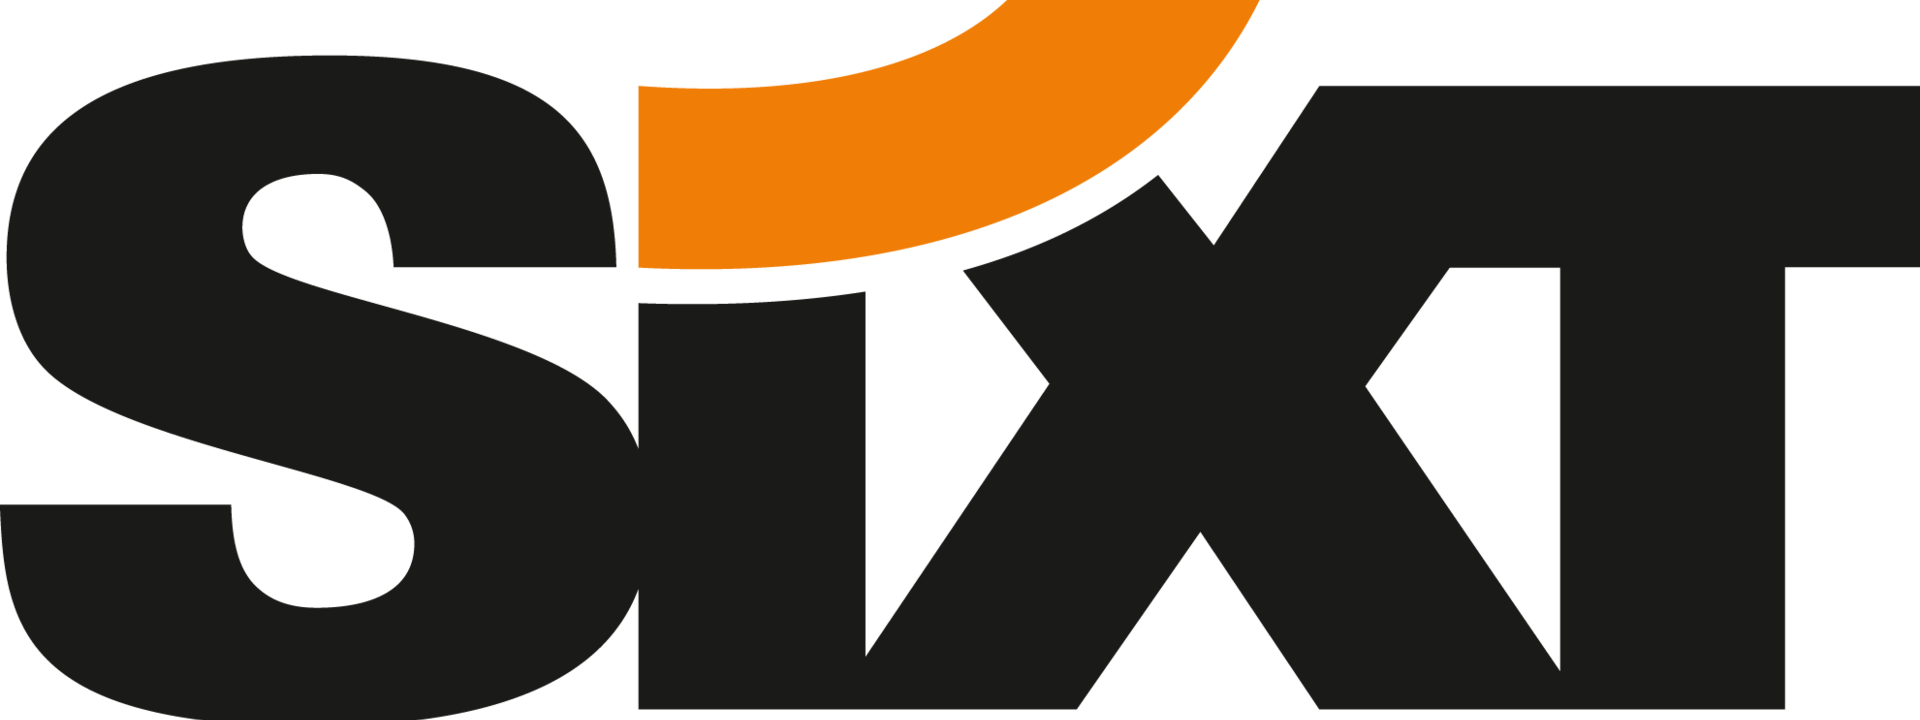 Sixt_neutral_2d_4c_pos - WHITE BACKGROUND.png